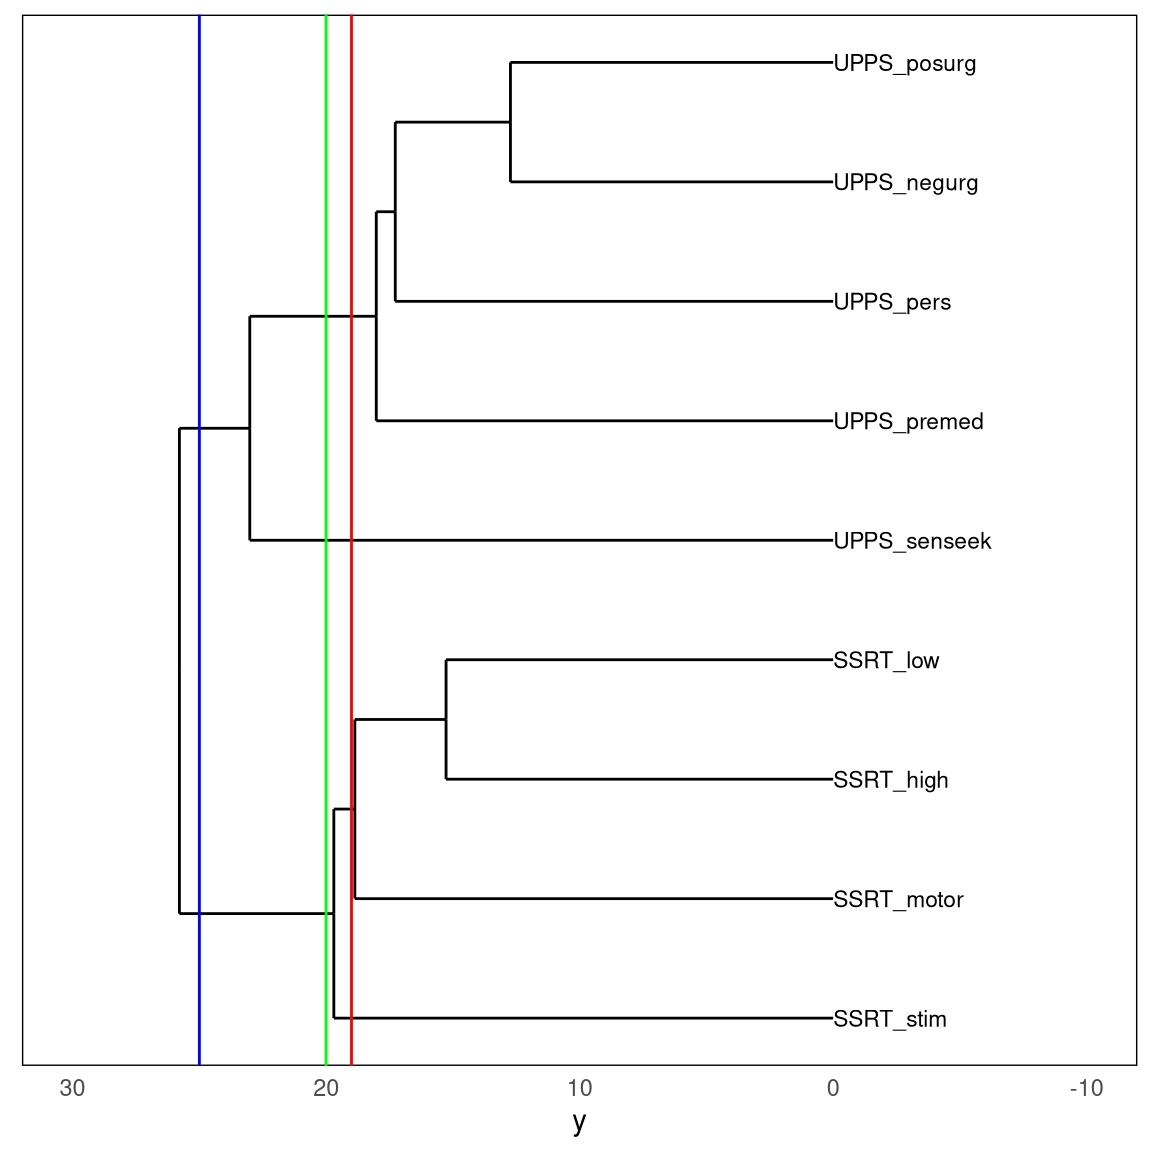 A dendrogram depicting the relative similarity of the nine self-control variables.  The three colored vertical lines represent three different cutoffs, resulting in either two (blue line), three (green line), or four (red line) clusters.